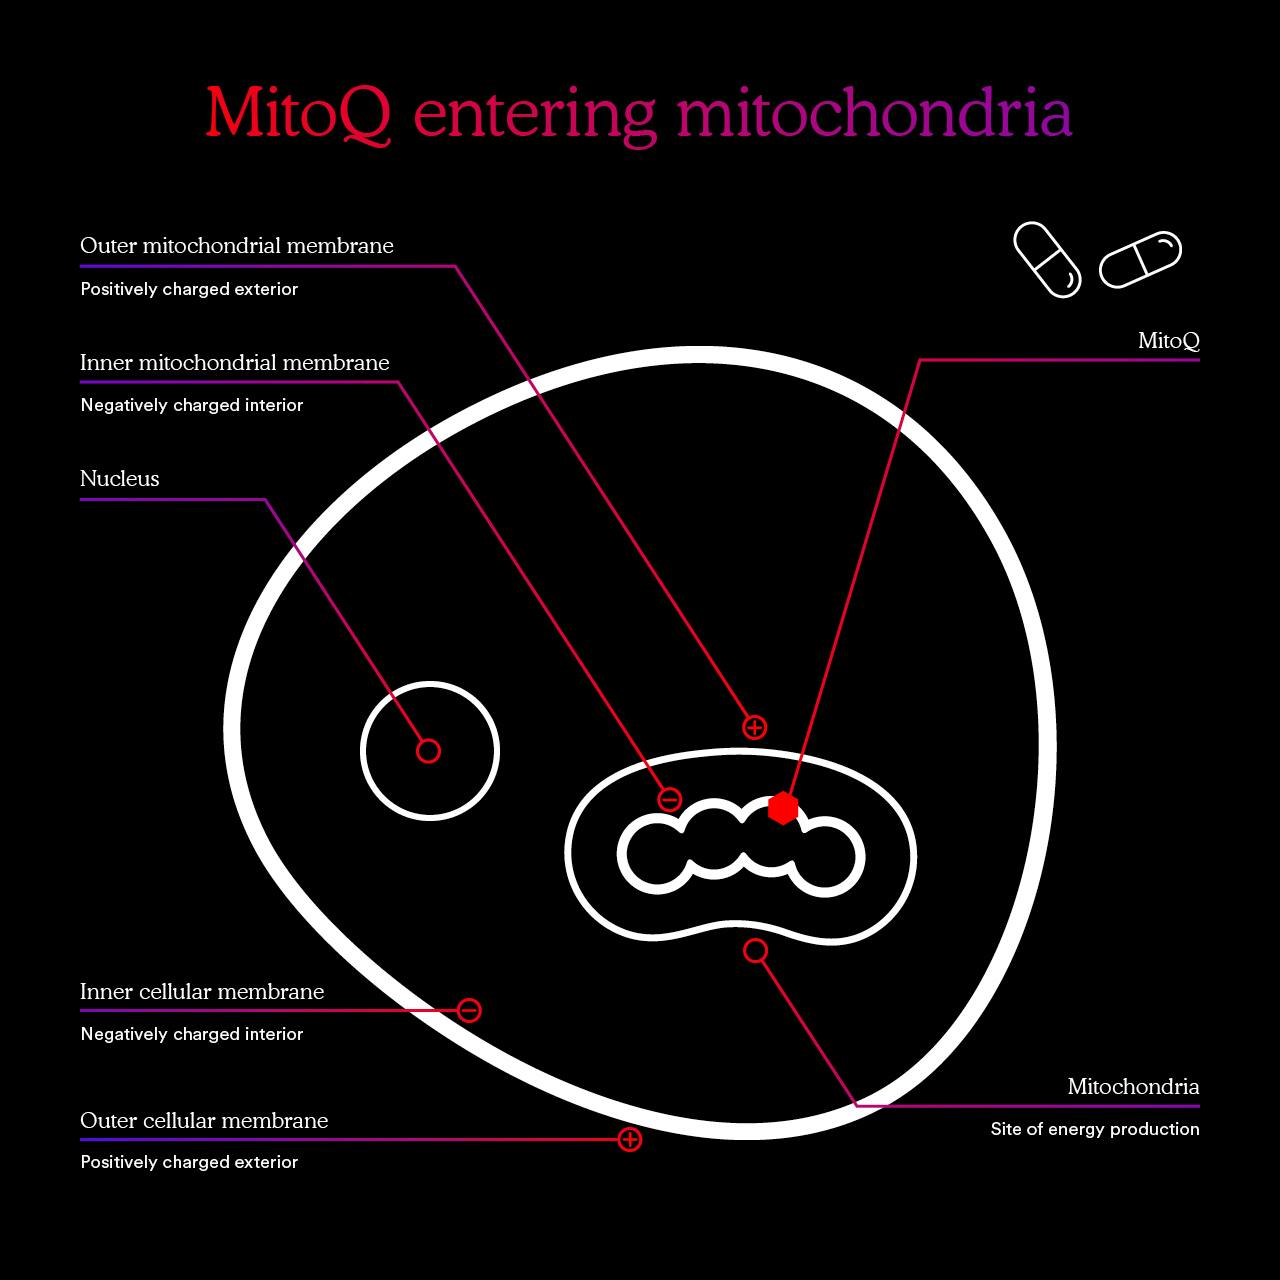 How MitoQ works